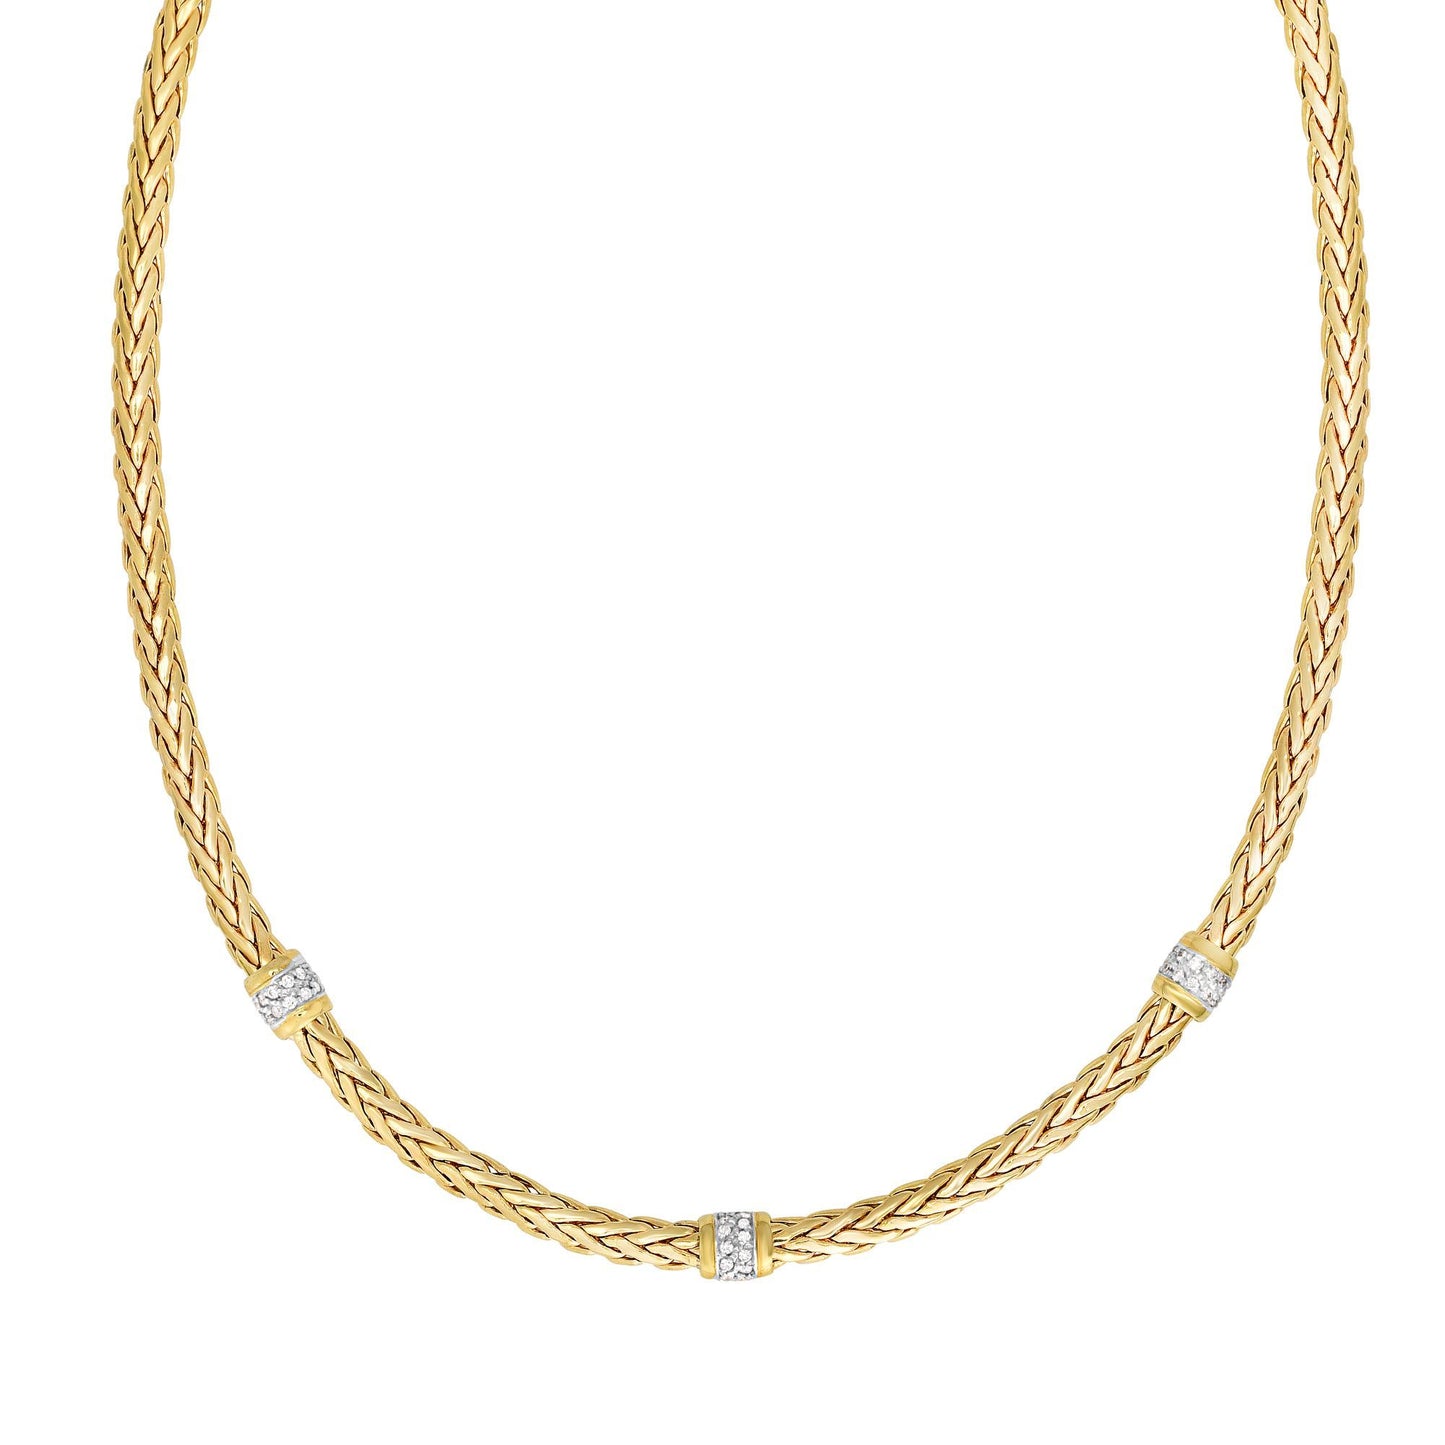 14K Gold and Stationed Diamonds Fancy Woven Braided Necklace with Box Clasp